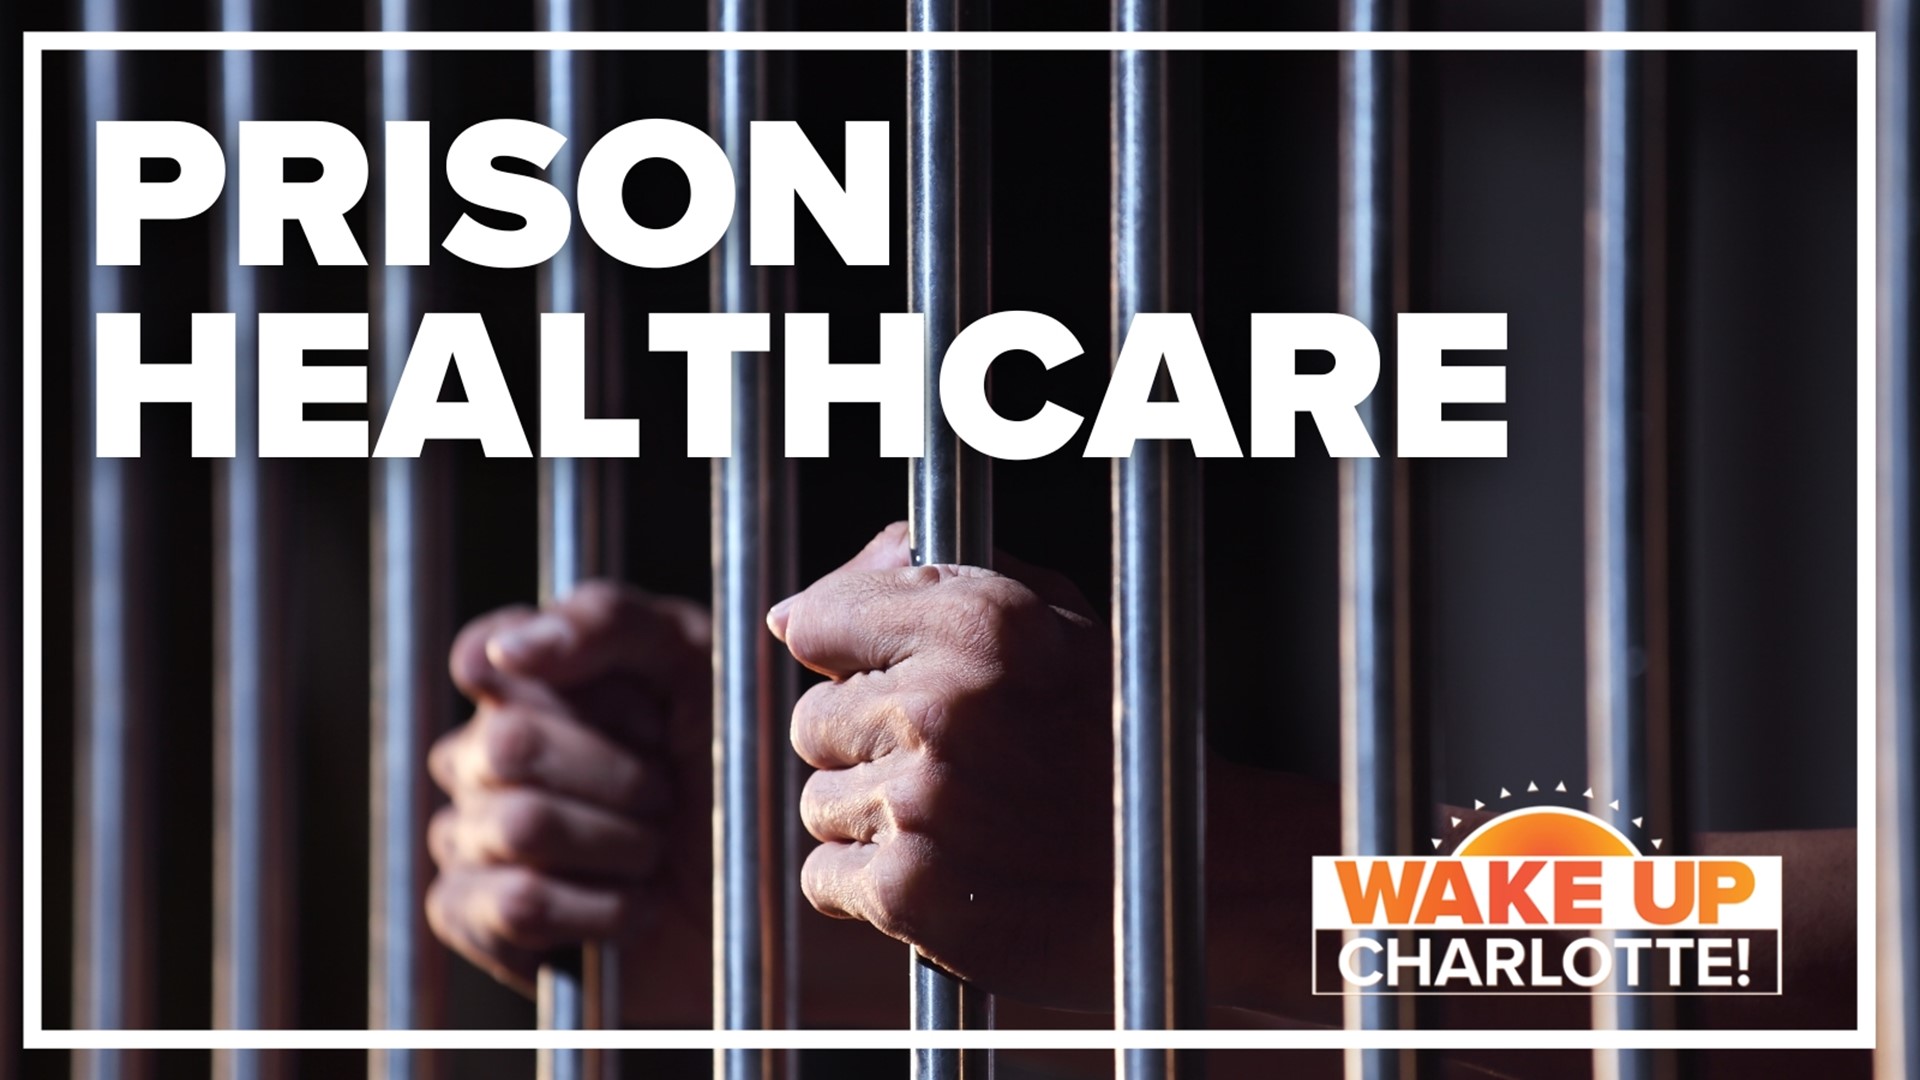 A fiscal analyst says healthcare costs are rising nationwide and that prisons are seeing the impacts.